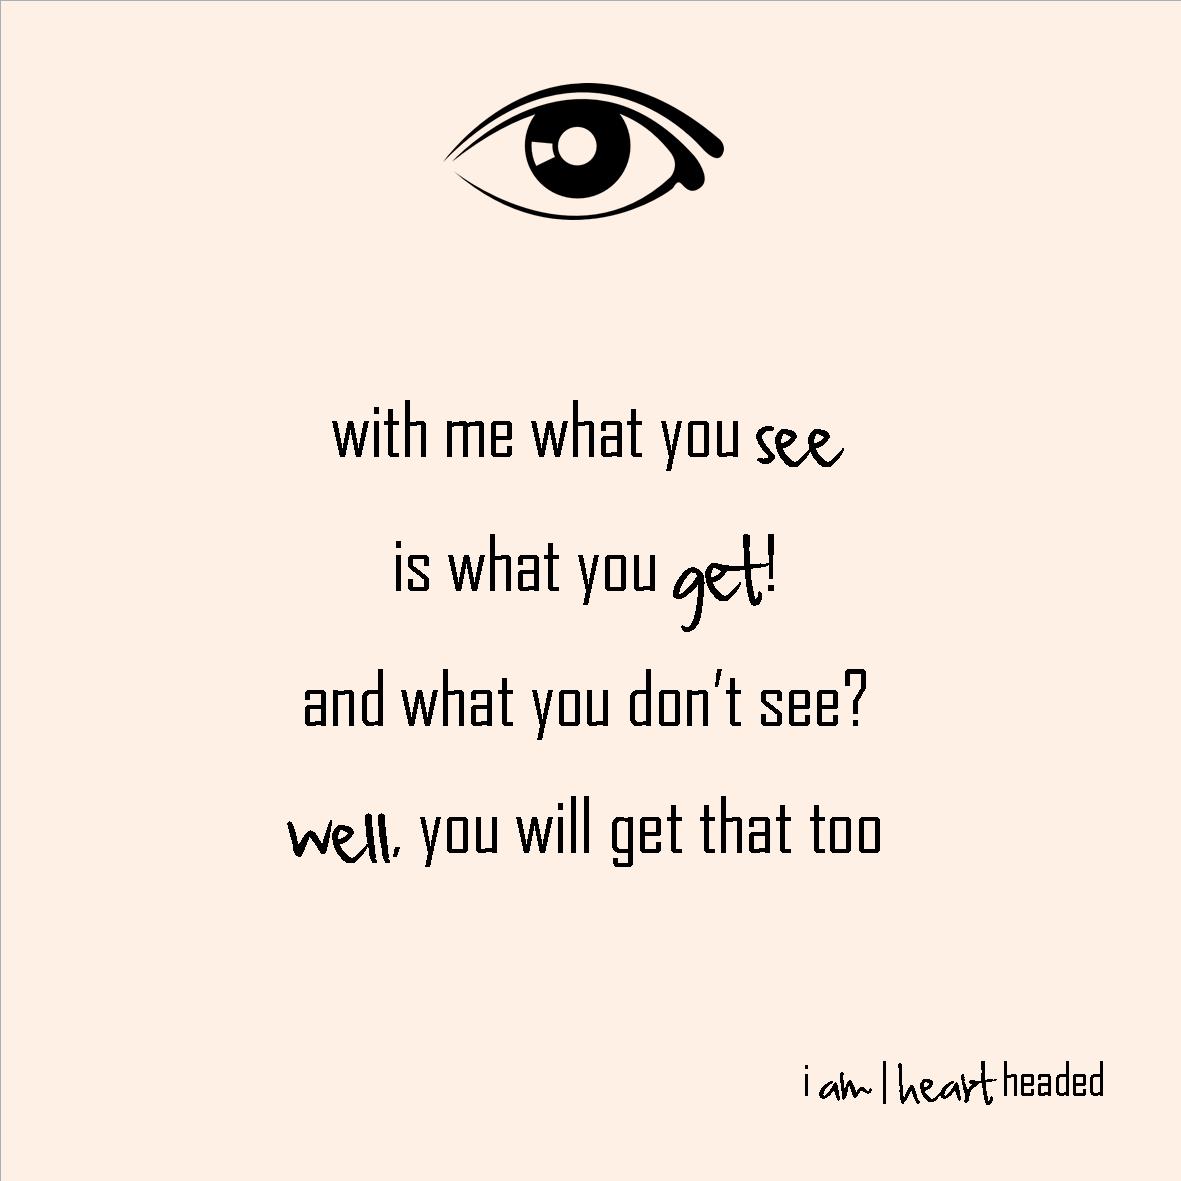 full-size featured image of quote 'what you see' in category 'sparkly' at i am | heart headed